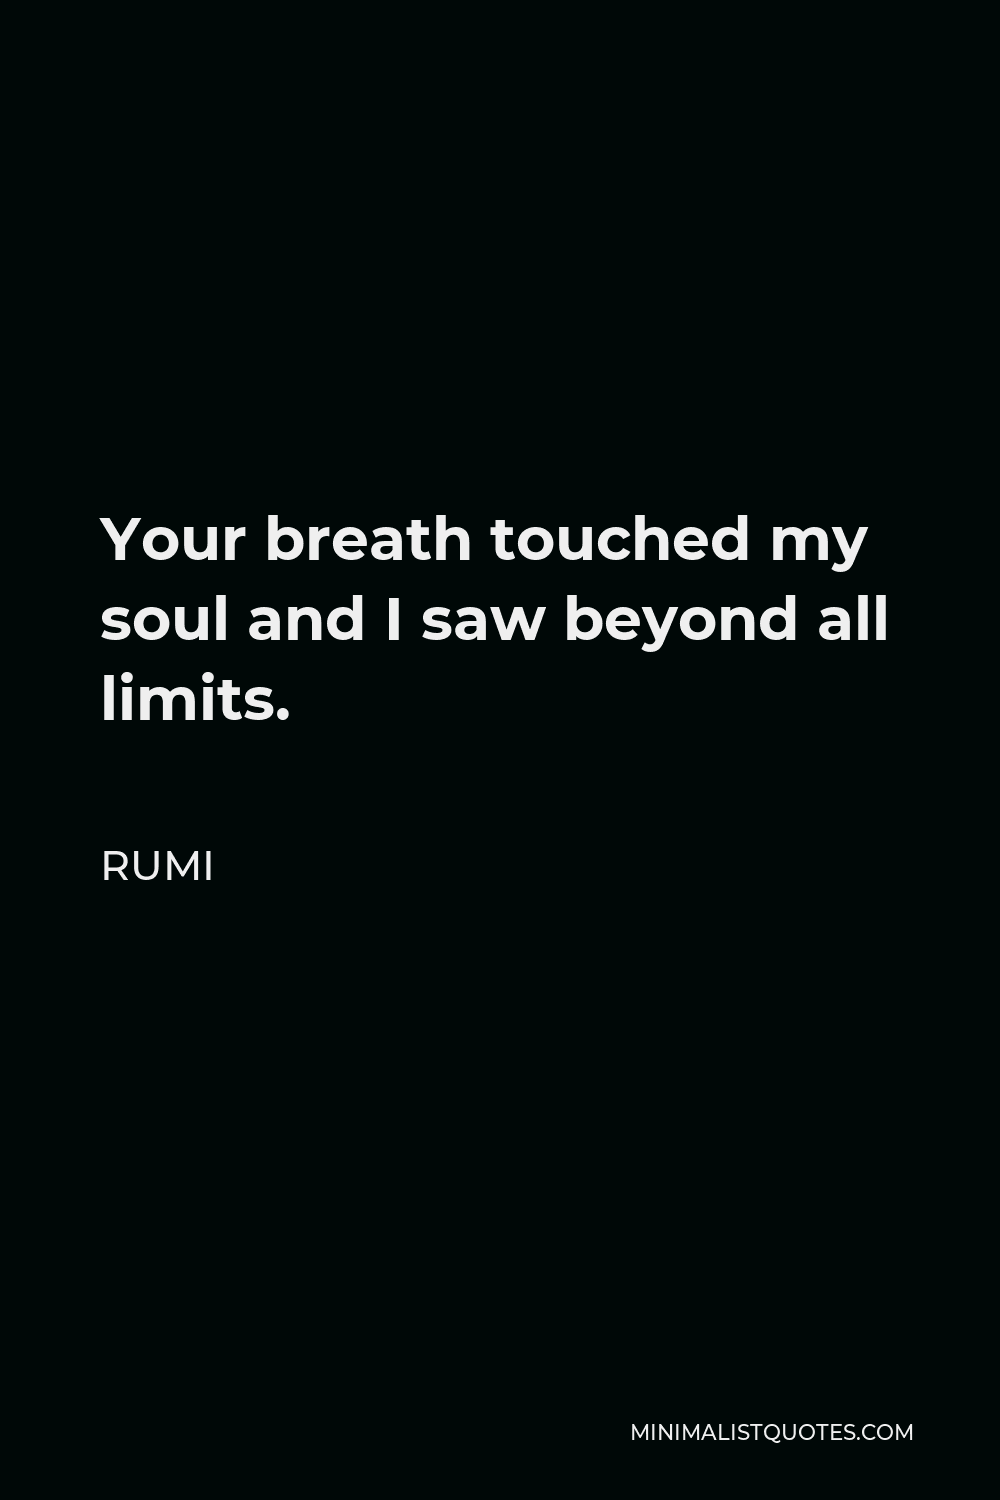 Rumi Quote - Your breath touched my soul and I saw beyond all limits.